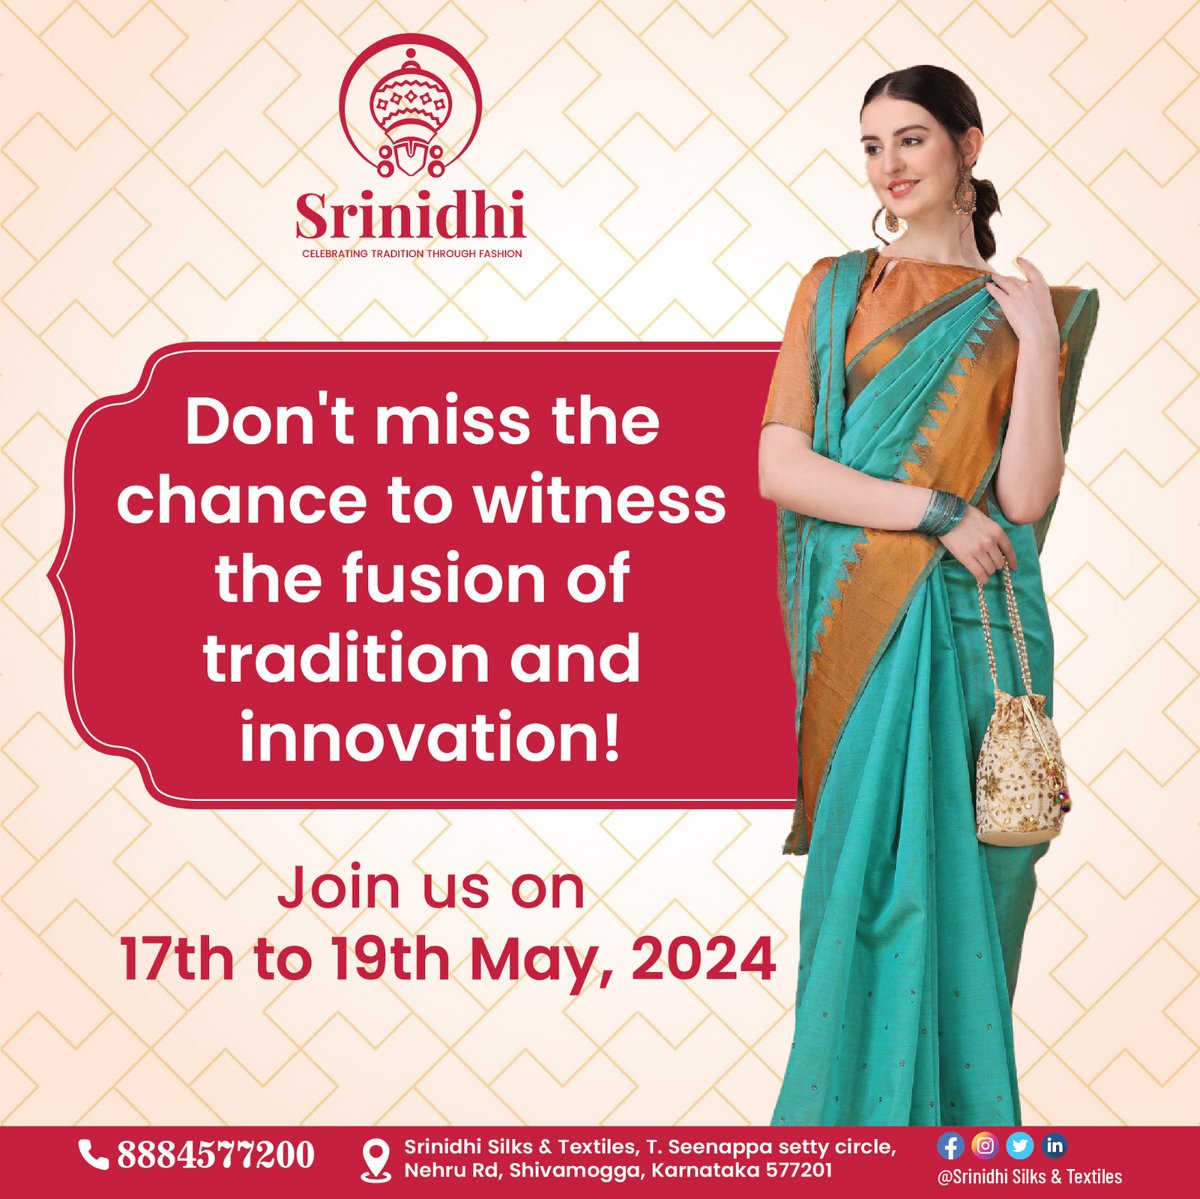 Srinidhi Silks & Textiles invites you to immerse yourself in a celebration of heritage and craftsmanship like never before!   From the 17th to the 19th of May, 2024
#Srinidhitextile #Srinidhitextileworld #srinidhitextilesshimoga #traditionalcollections #FamilyShopping #SilkSarees